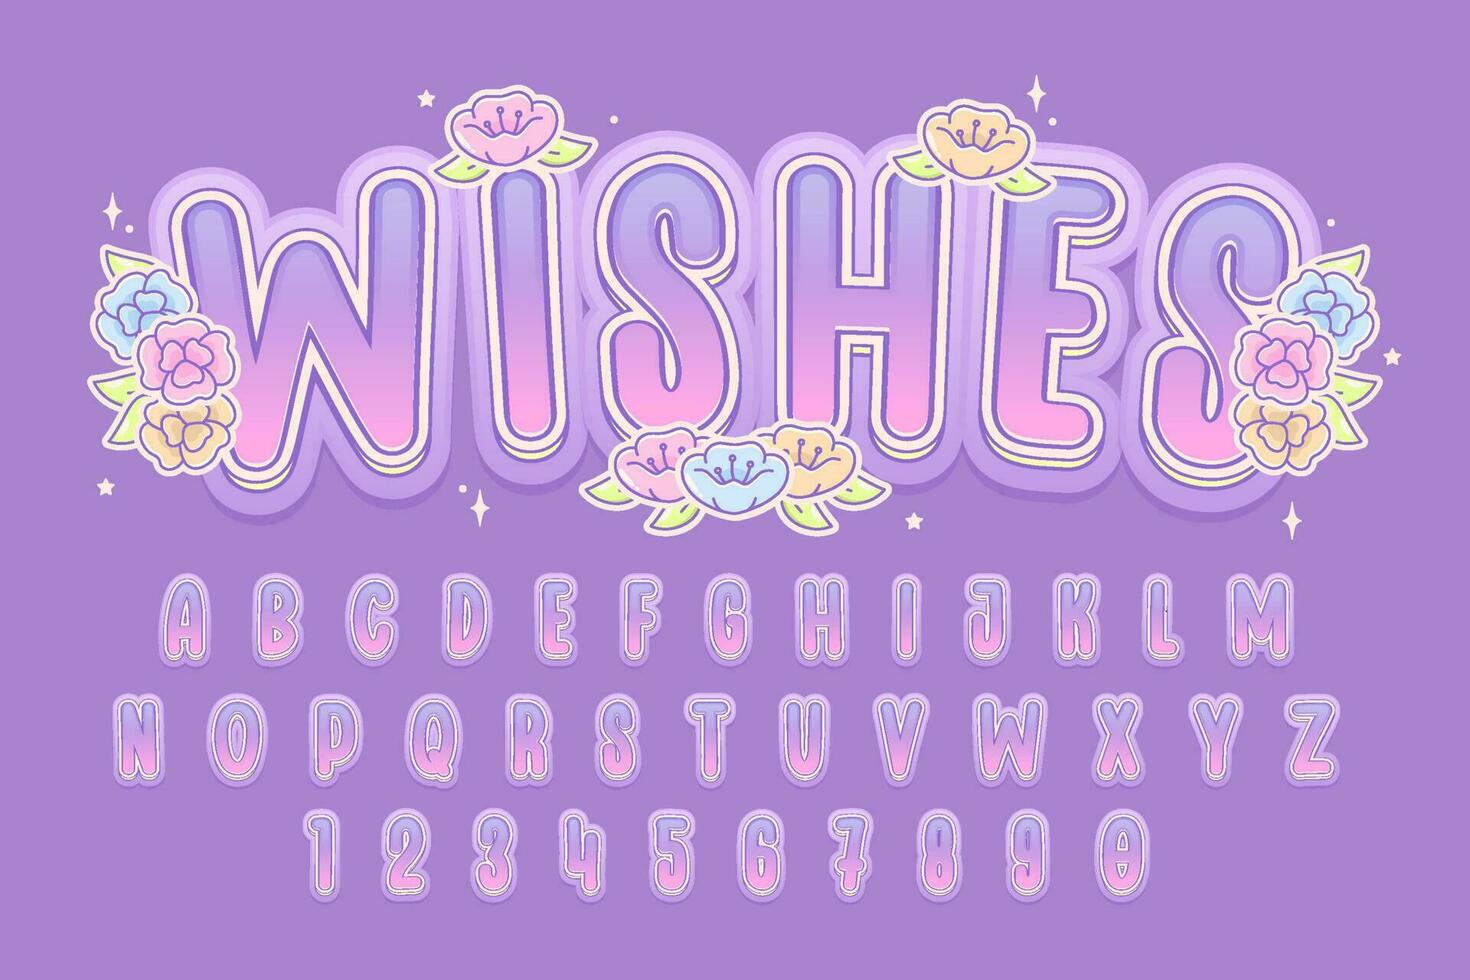 decorative editable wishes text effect vector design